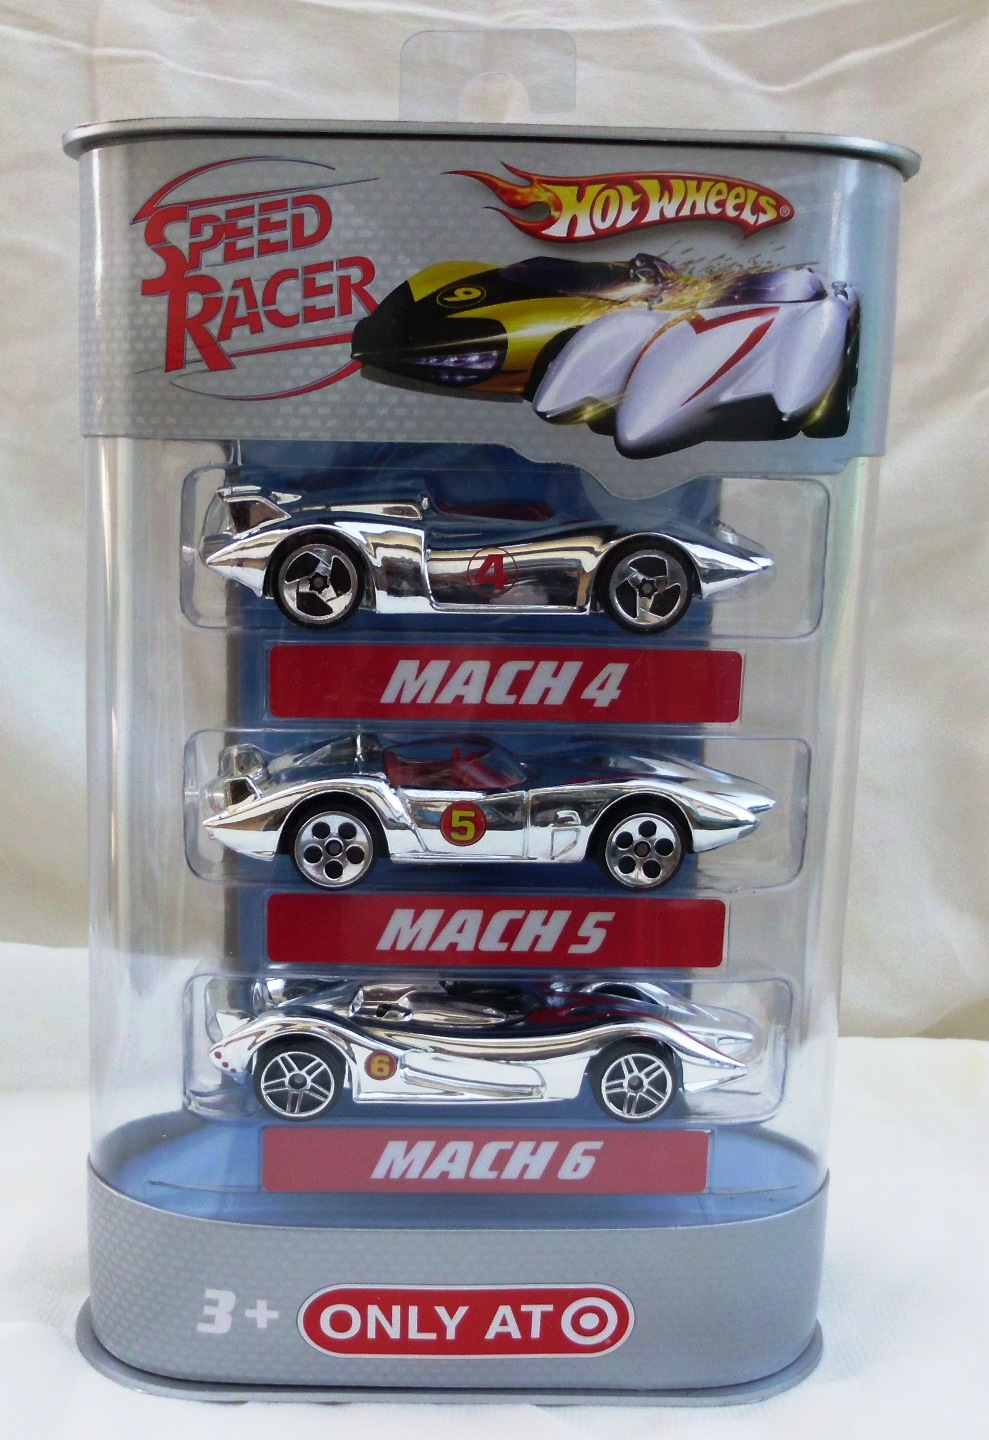 2007 Hot Wheels Speed Racer Mach 4 Race Car With Saw Blades Movie Accessory INCD for sale online